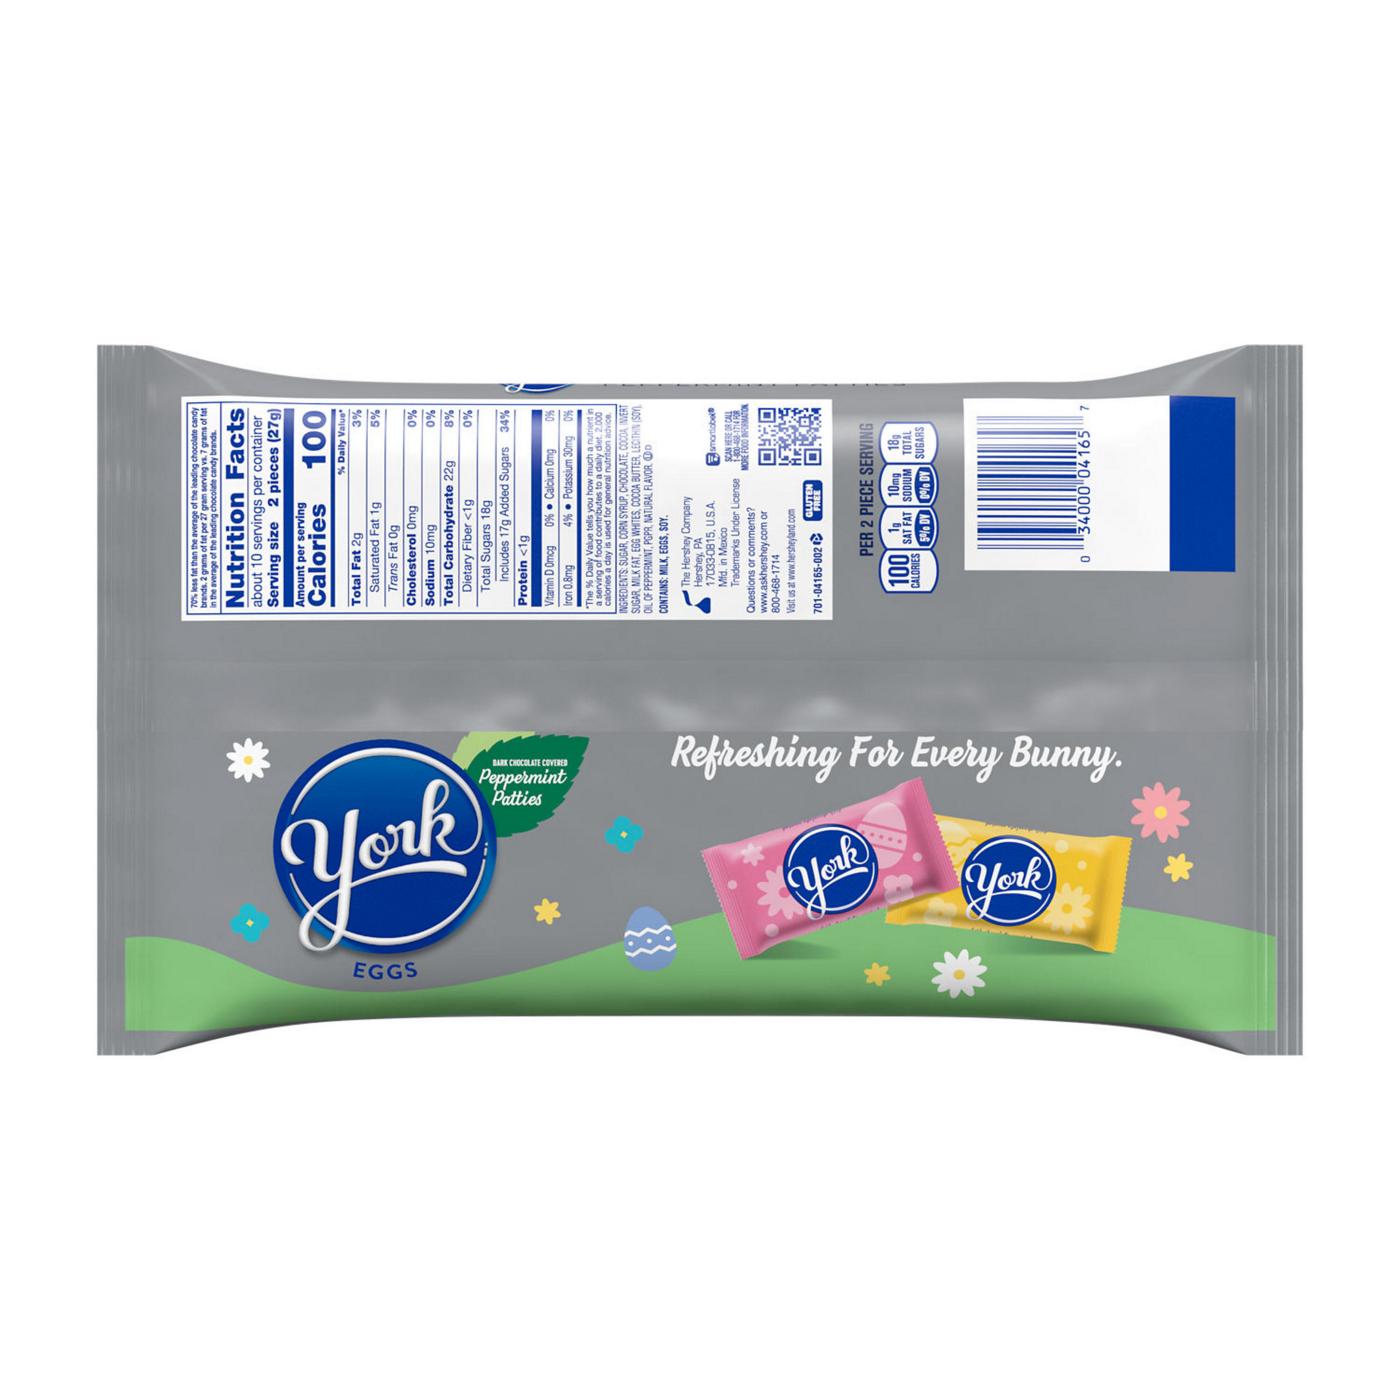 York Peppermint Patties Eggs Easter Candy - Shop Candy at H-E-B